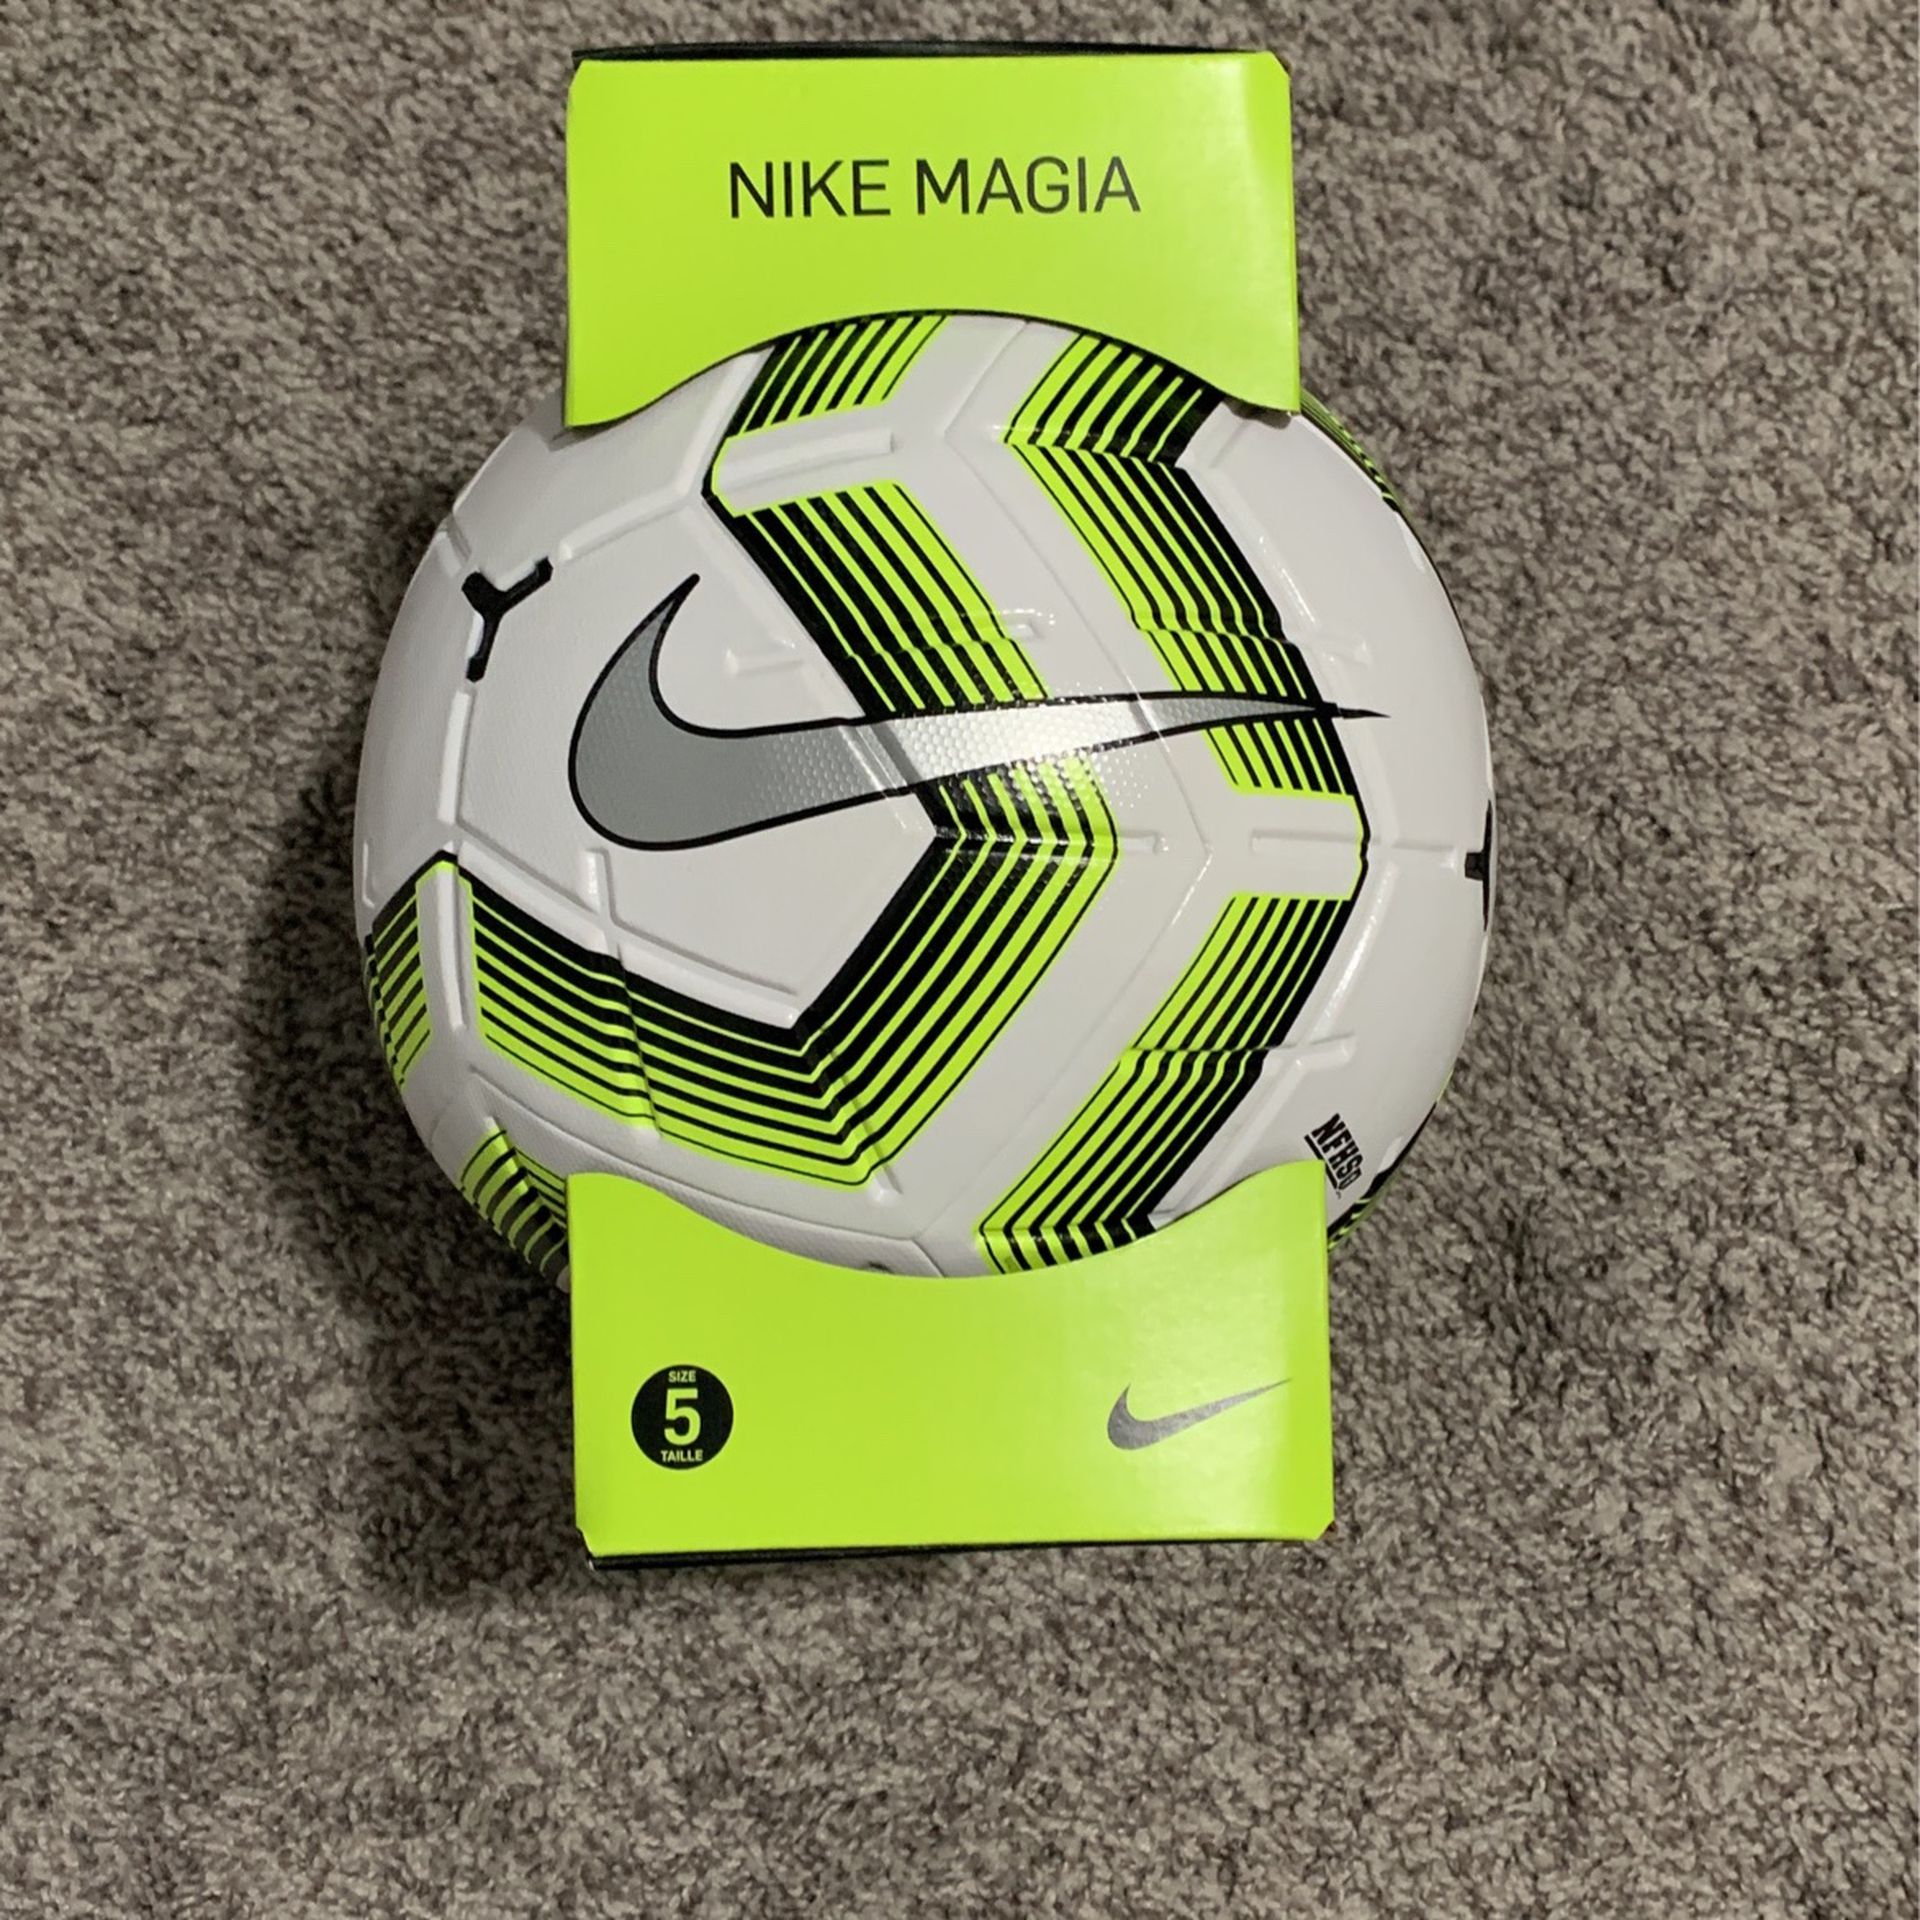 Nike Team NFHS Magia Soccer Ball Size 5 Match Ball SC3537-100 NEW IN BOX! for Sale in San CA